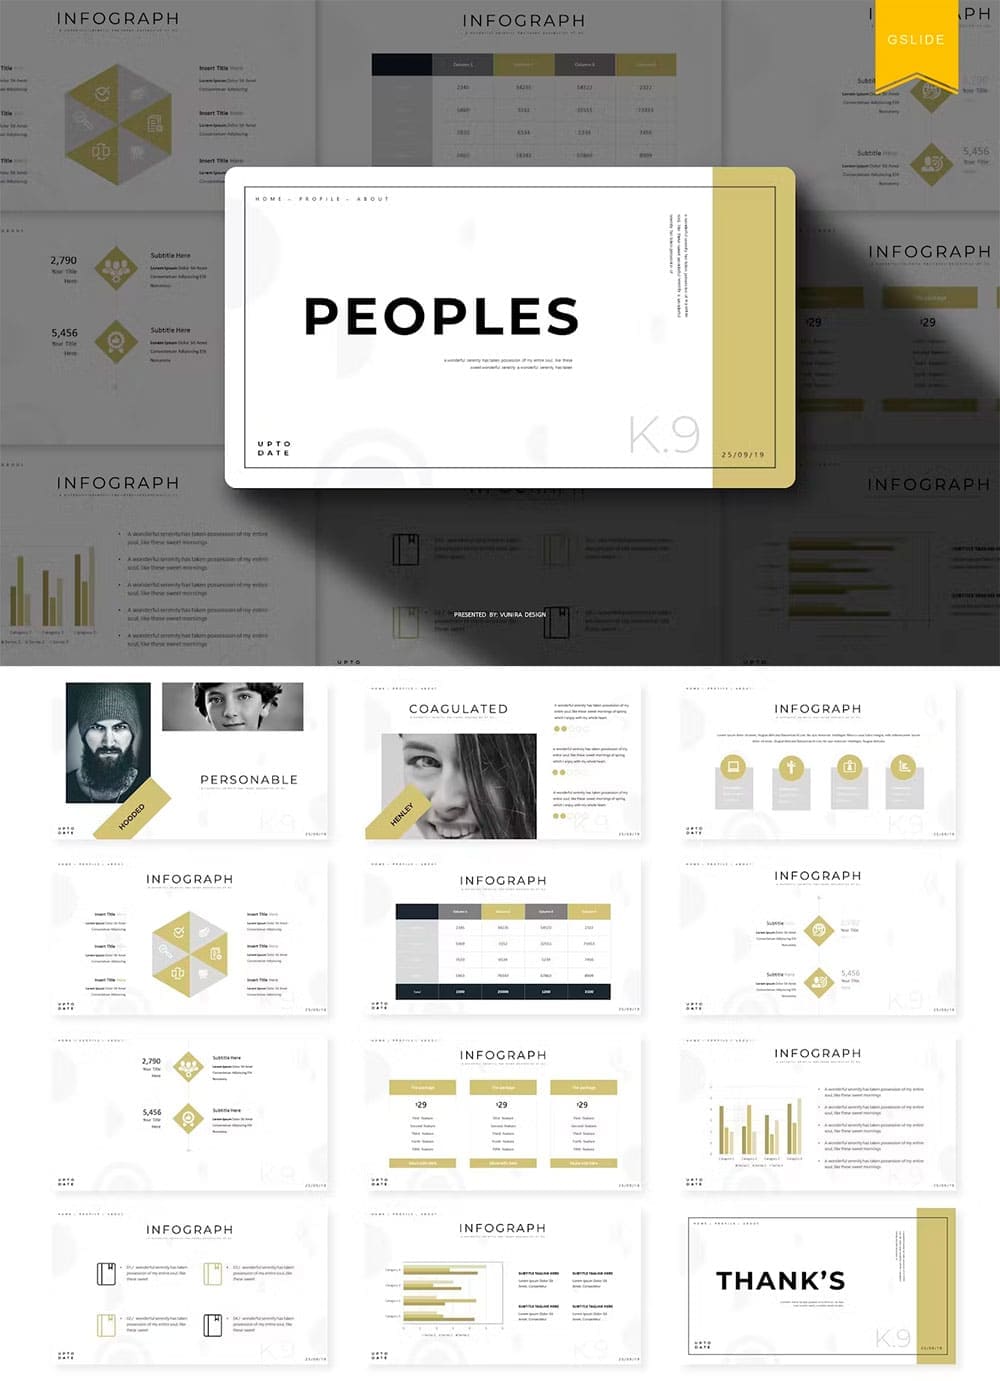 Peoples google slides template, picture for pinterest.